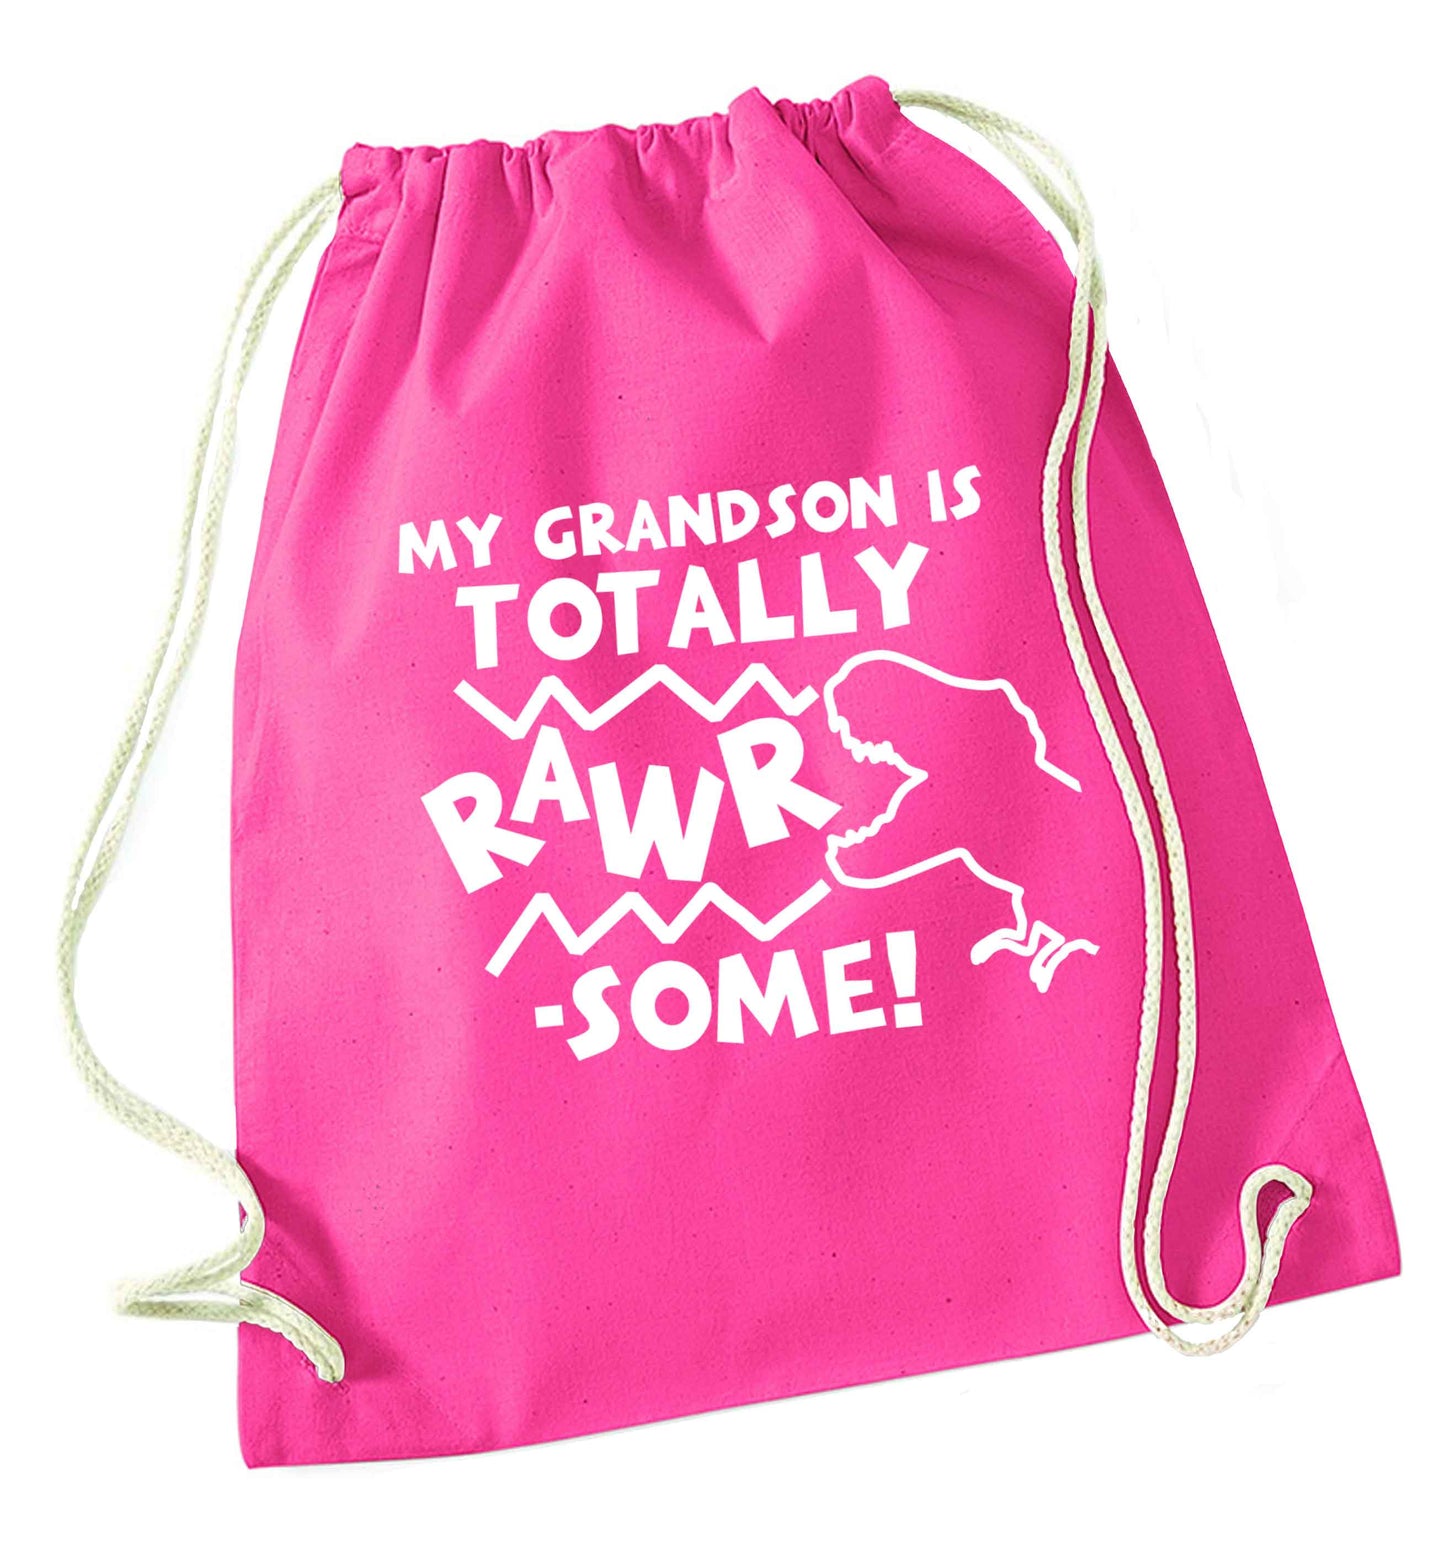 My grandson is totally rawrsome pink drawstring bag